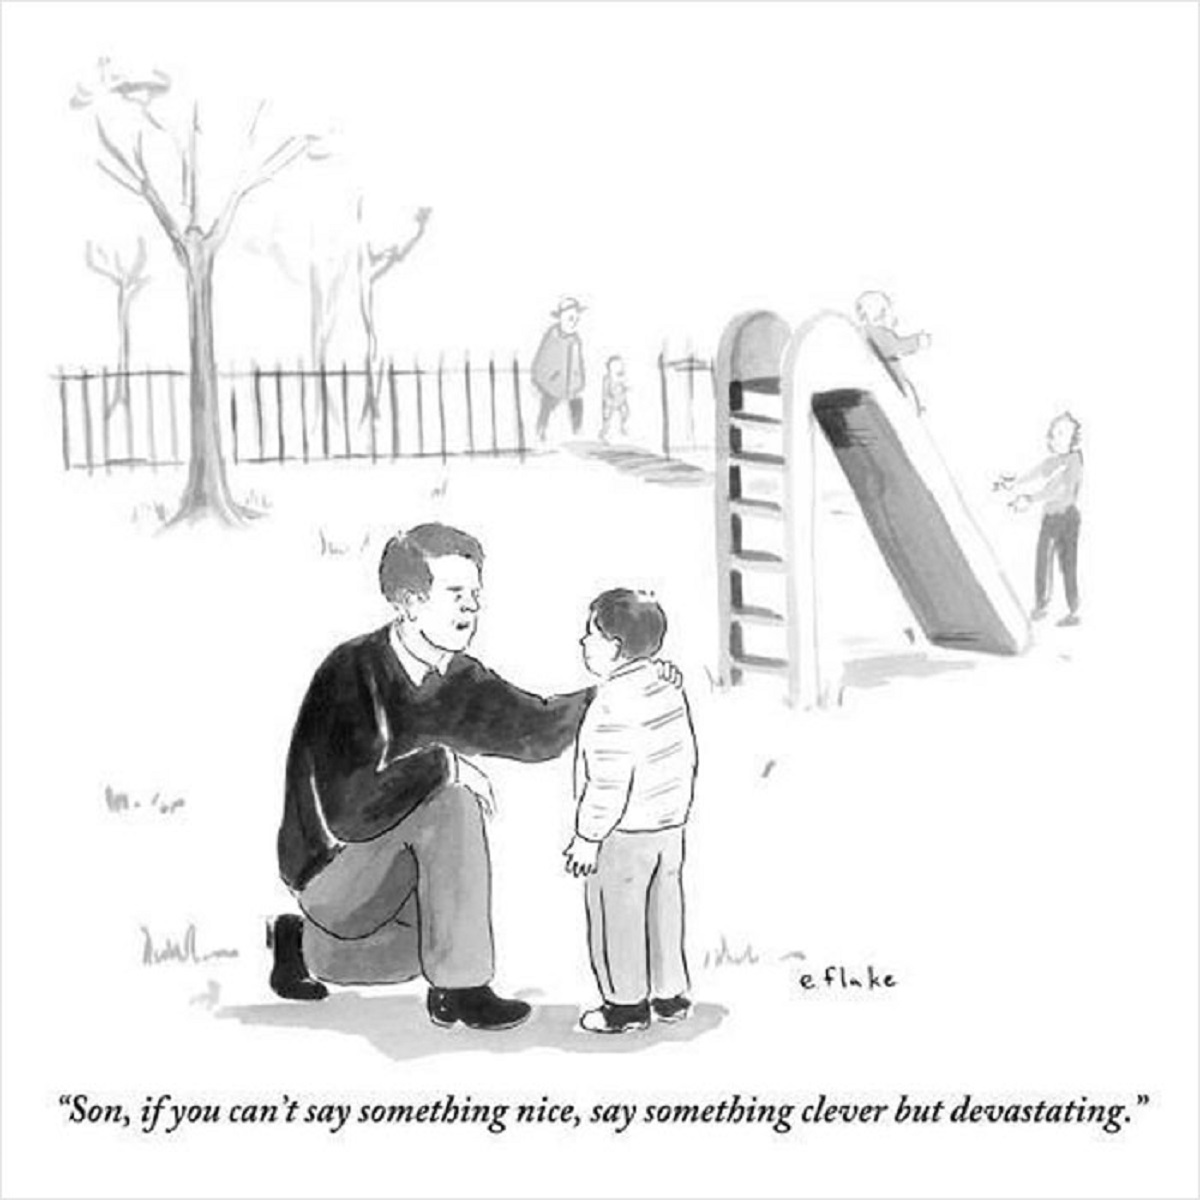 new yorker cartoon if you can t say something nice - dulline e flake "Son, if you can't say something nice, say something clever but devastating."